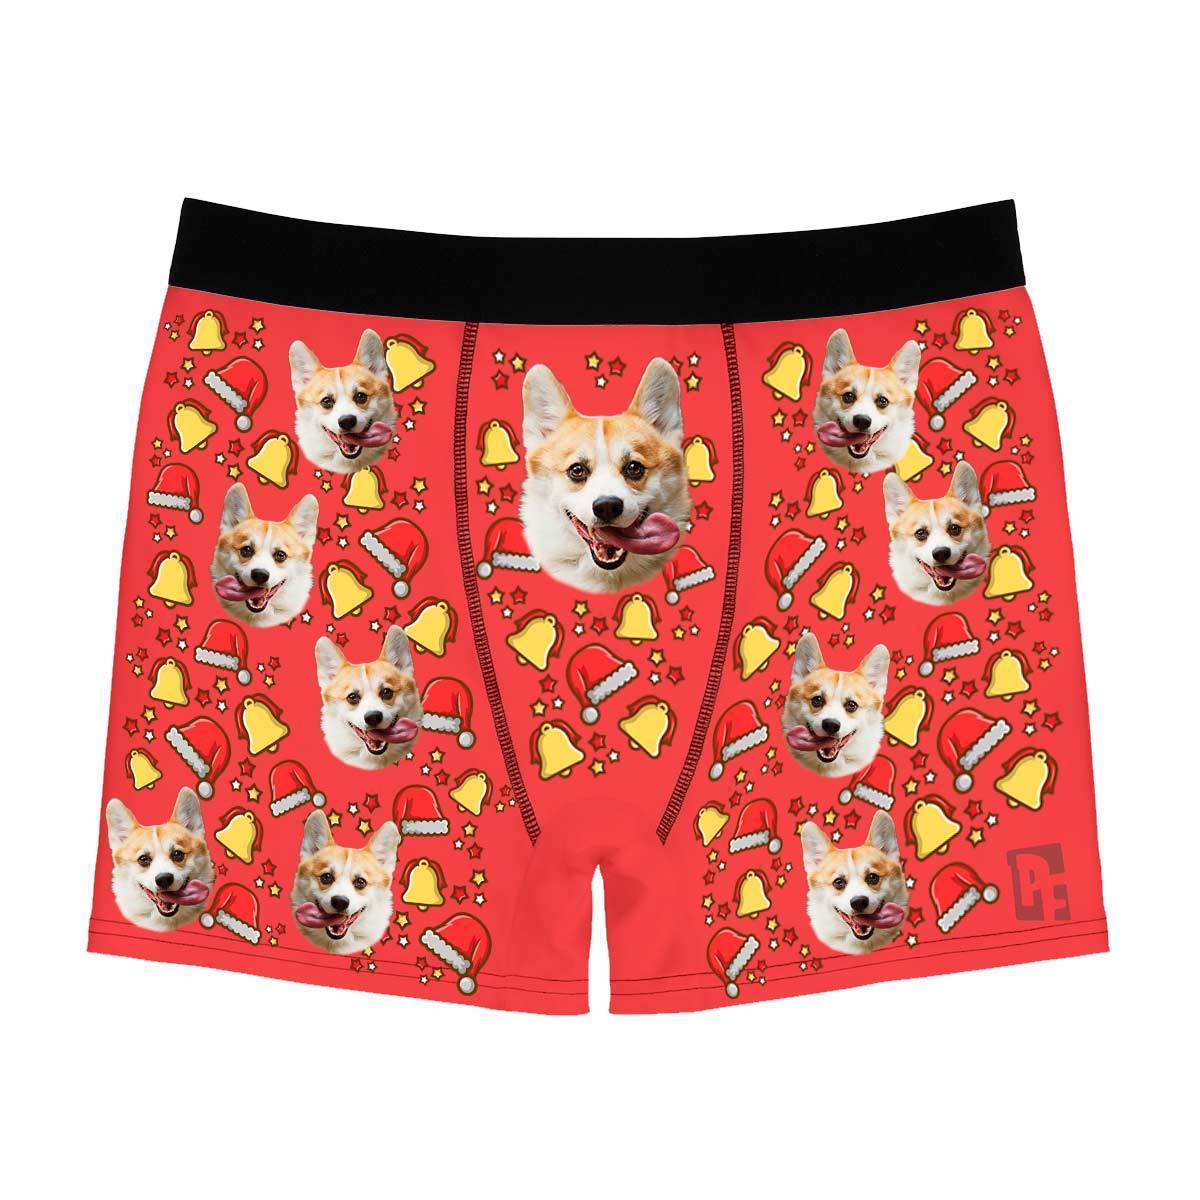 Red Santa's hat men's boxer briefs personalized with photo printed on them